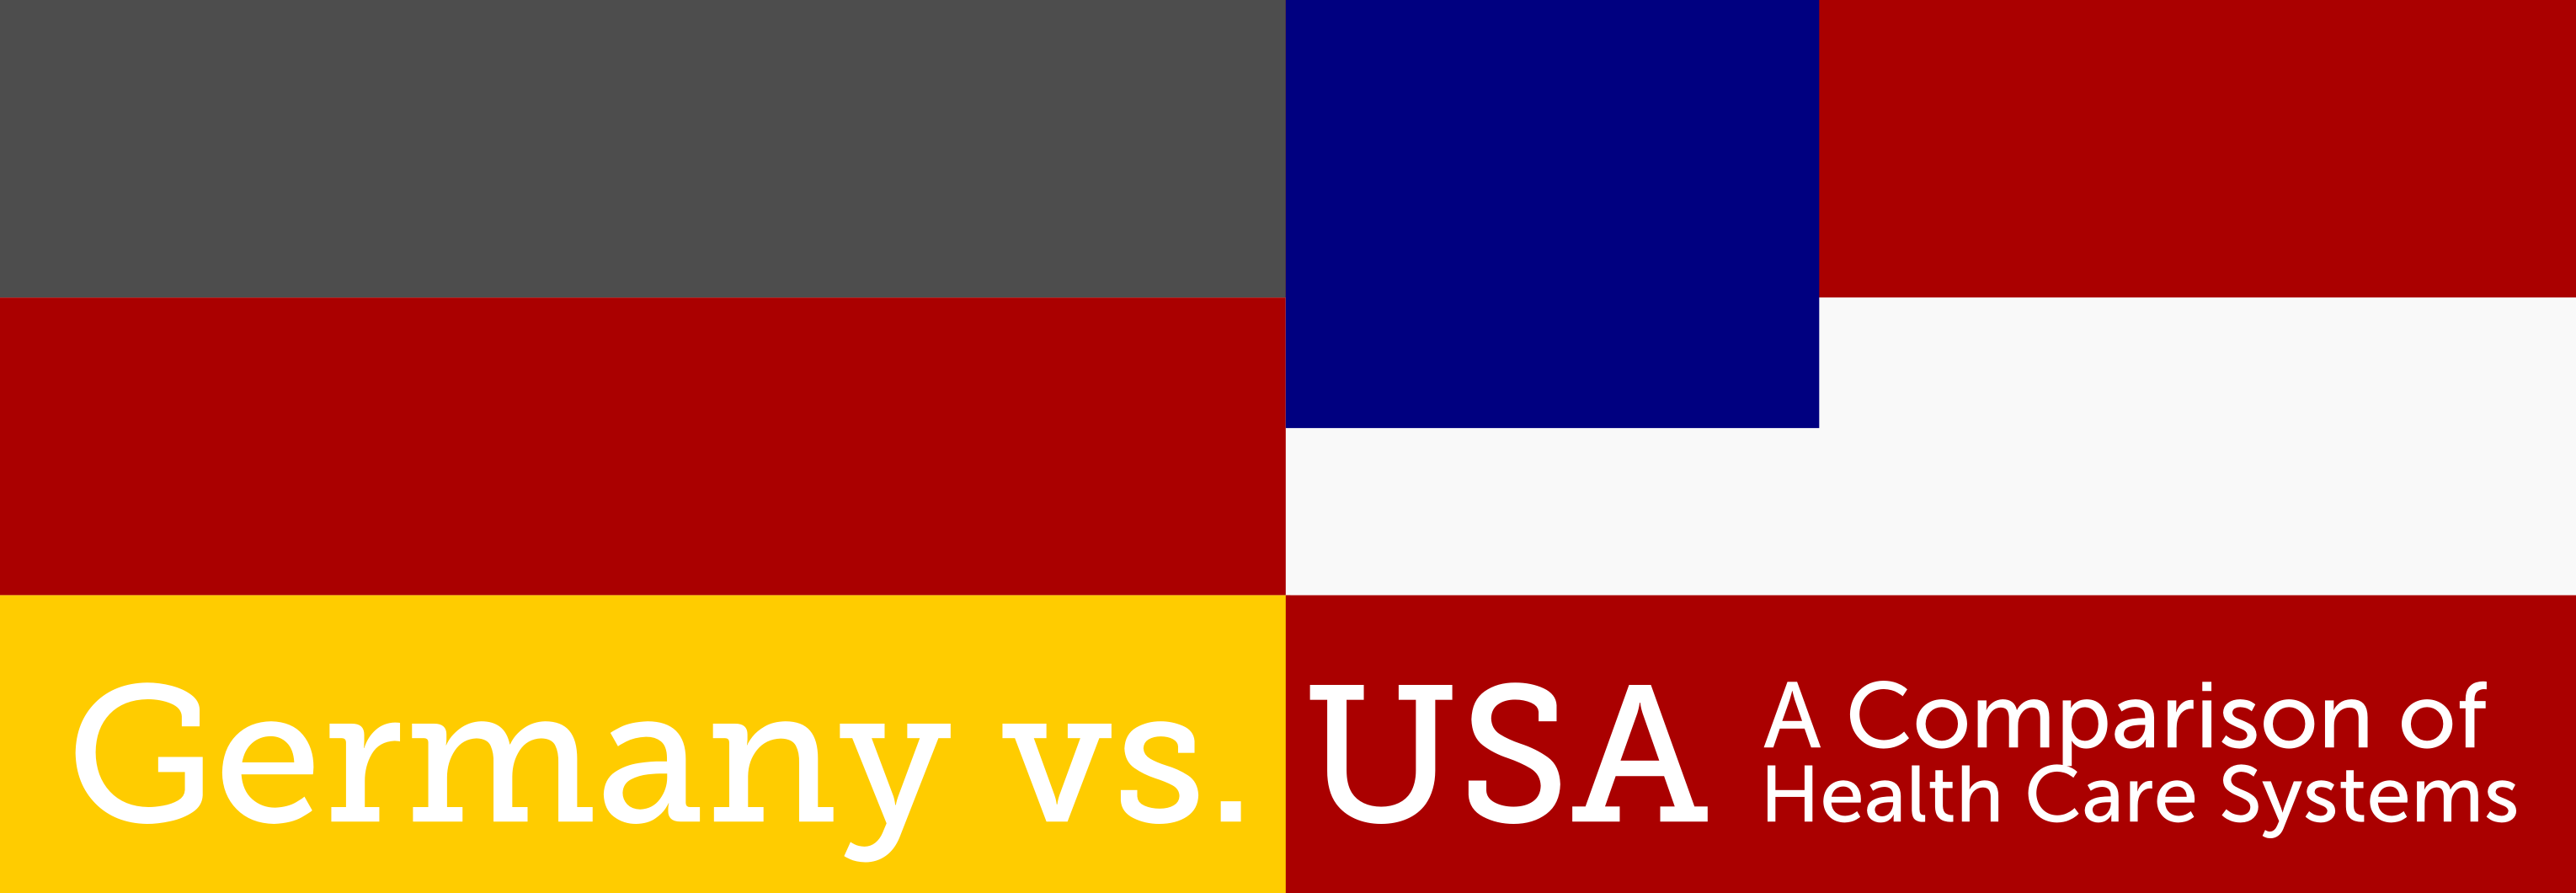 germany vs usa health care systems comparision